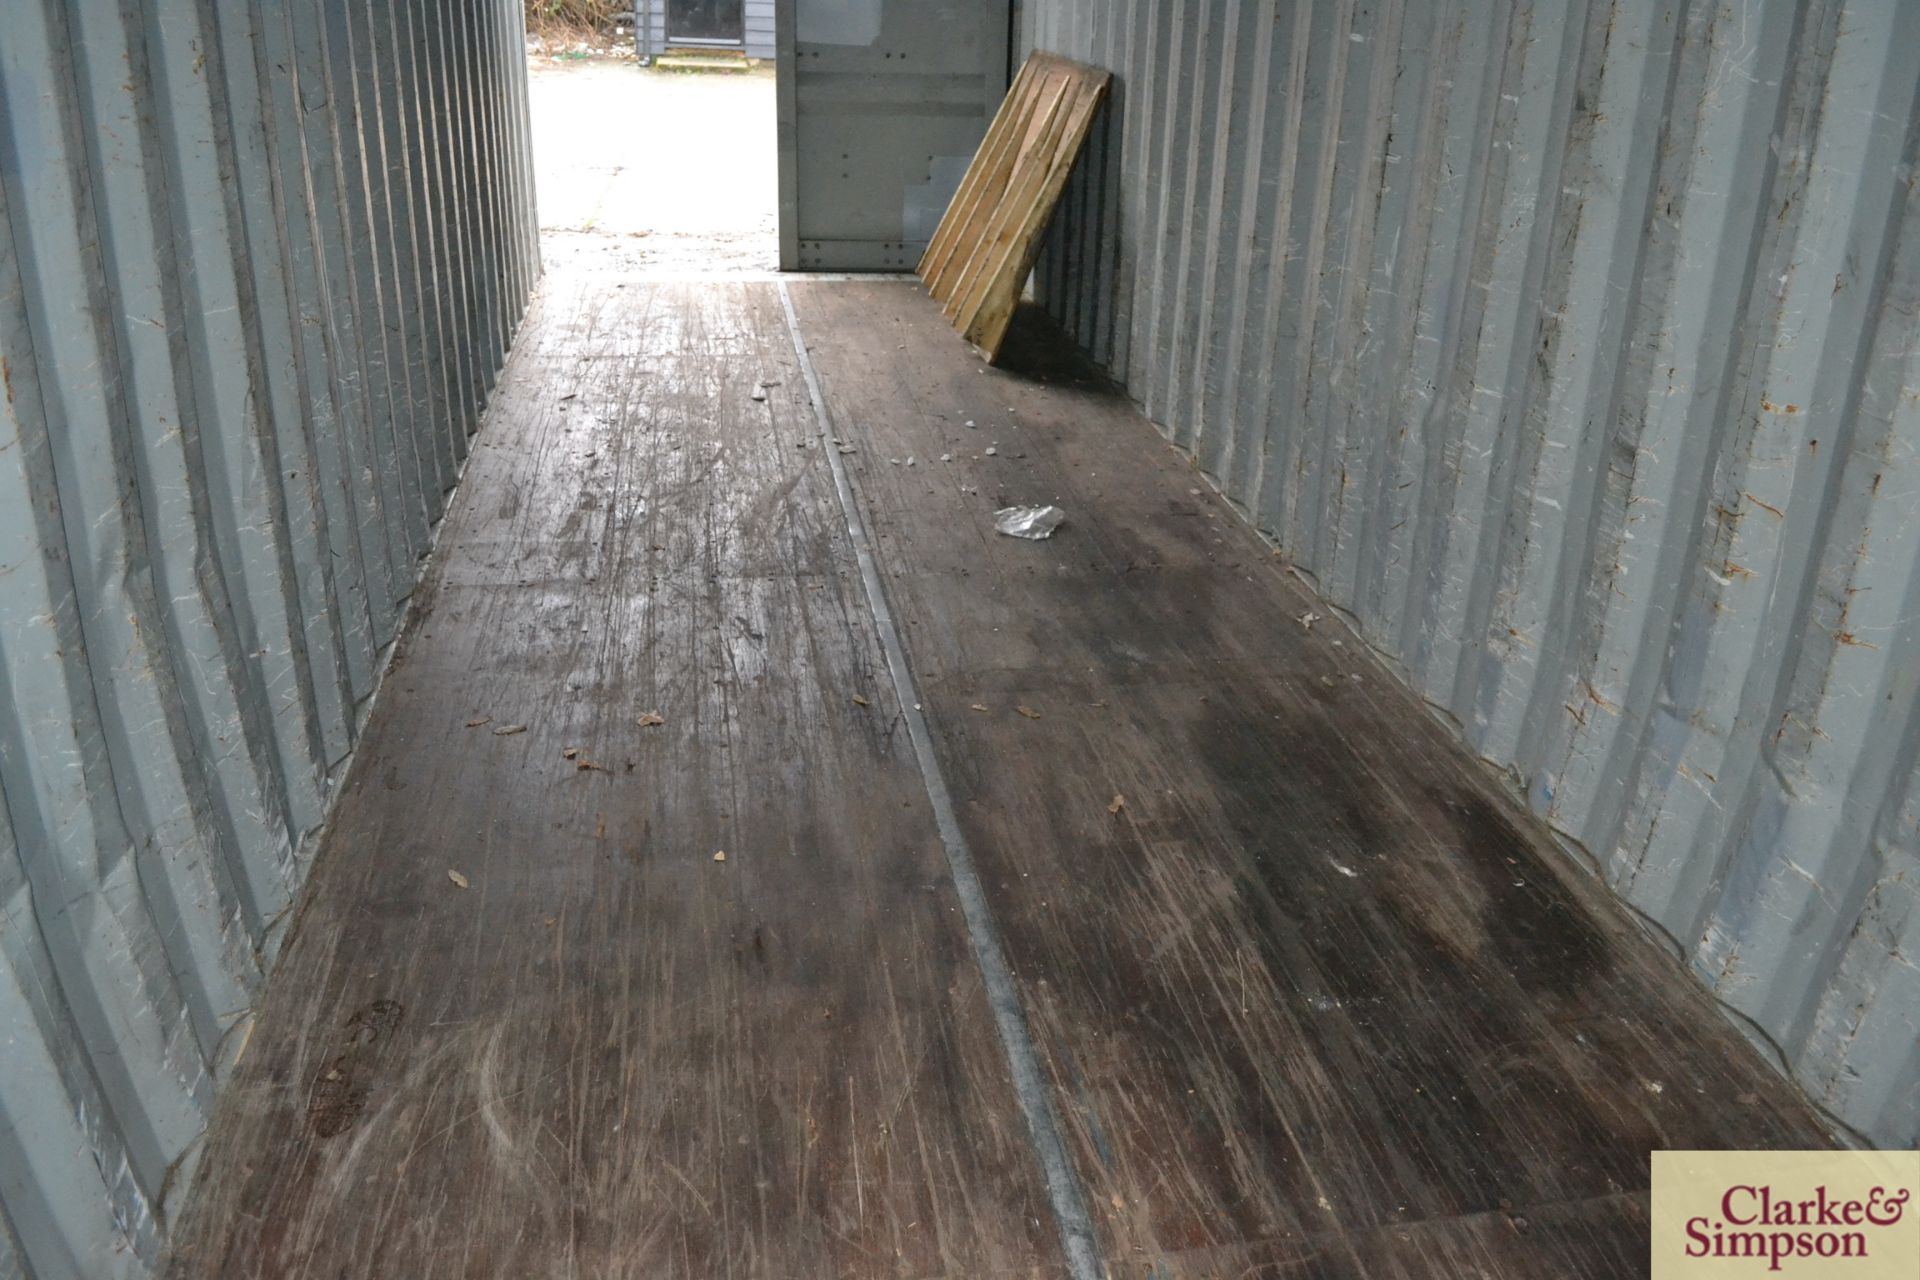 40ft shipping container. 2003. To be sold in situ and removed at purchaser's expense. - Image 6 of 7